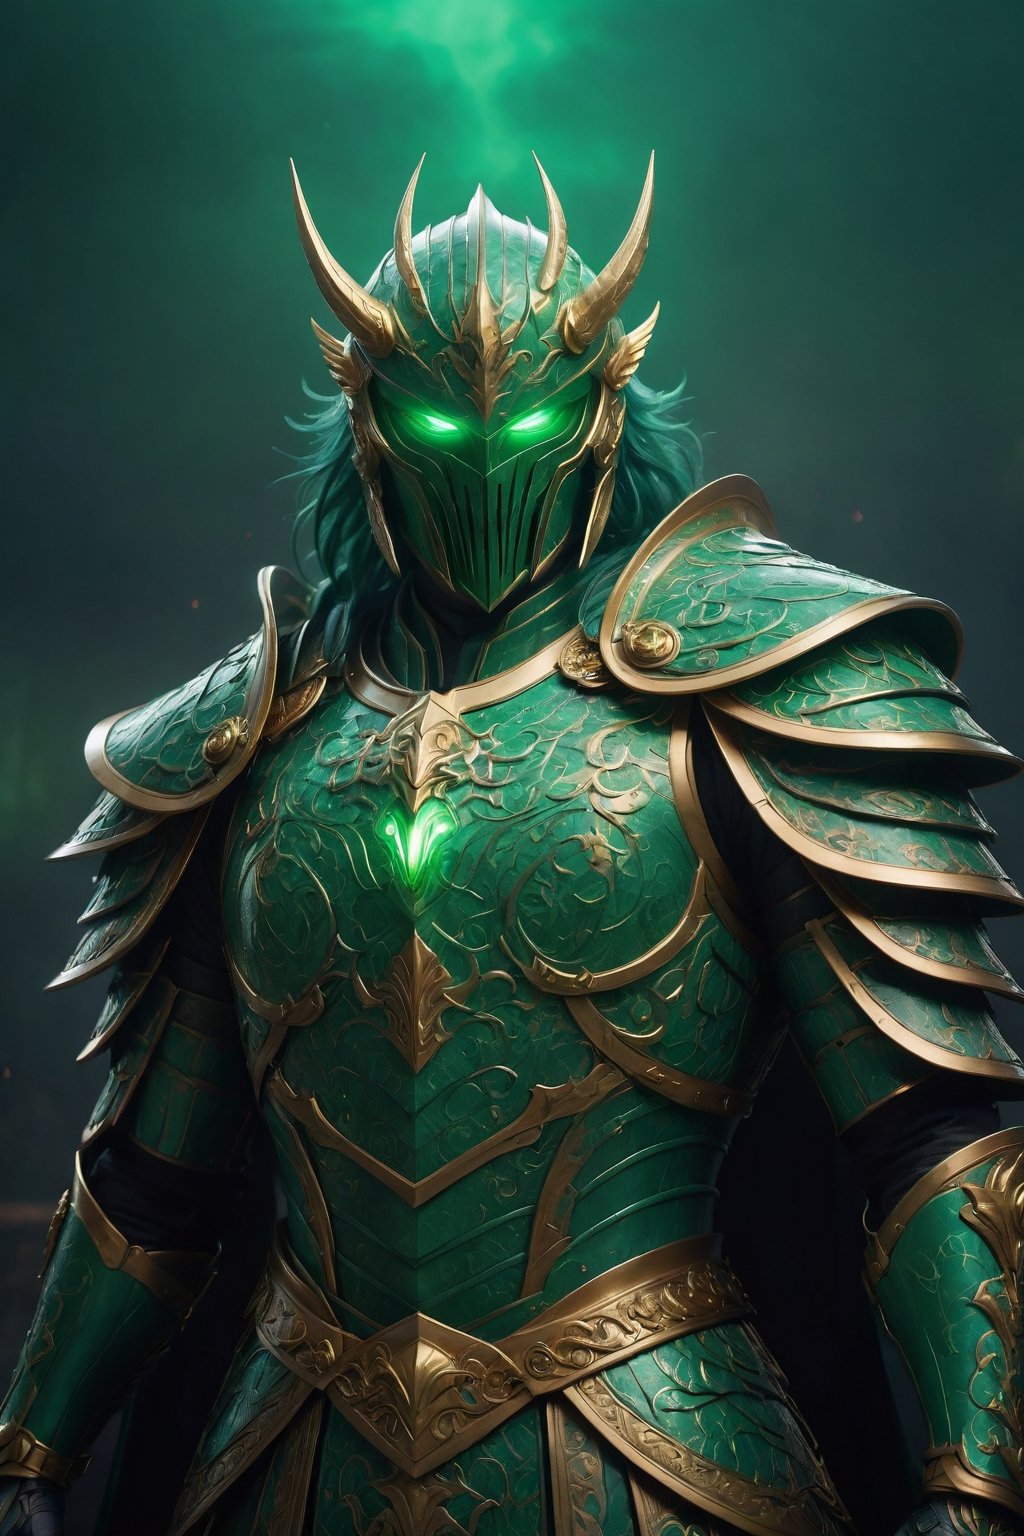 Merdusa armour, green colour, villain cape, angry, glowing eyes and an aura of rage surrounding him, cinematic style, anamorphic lens, black fog filter, film grain, perfect composition, film grain, film lighting, good composition, good anatomy, intimidating, 
